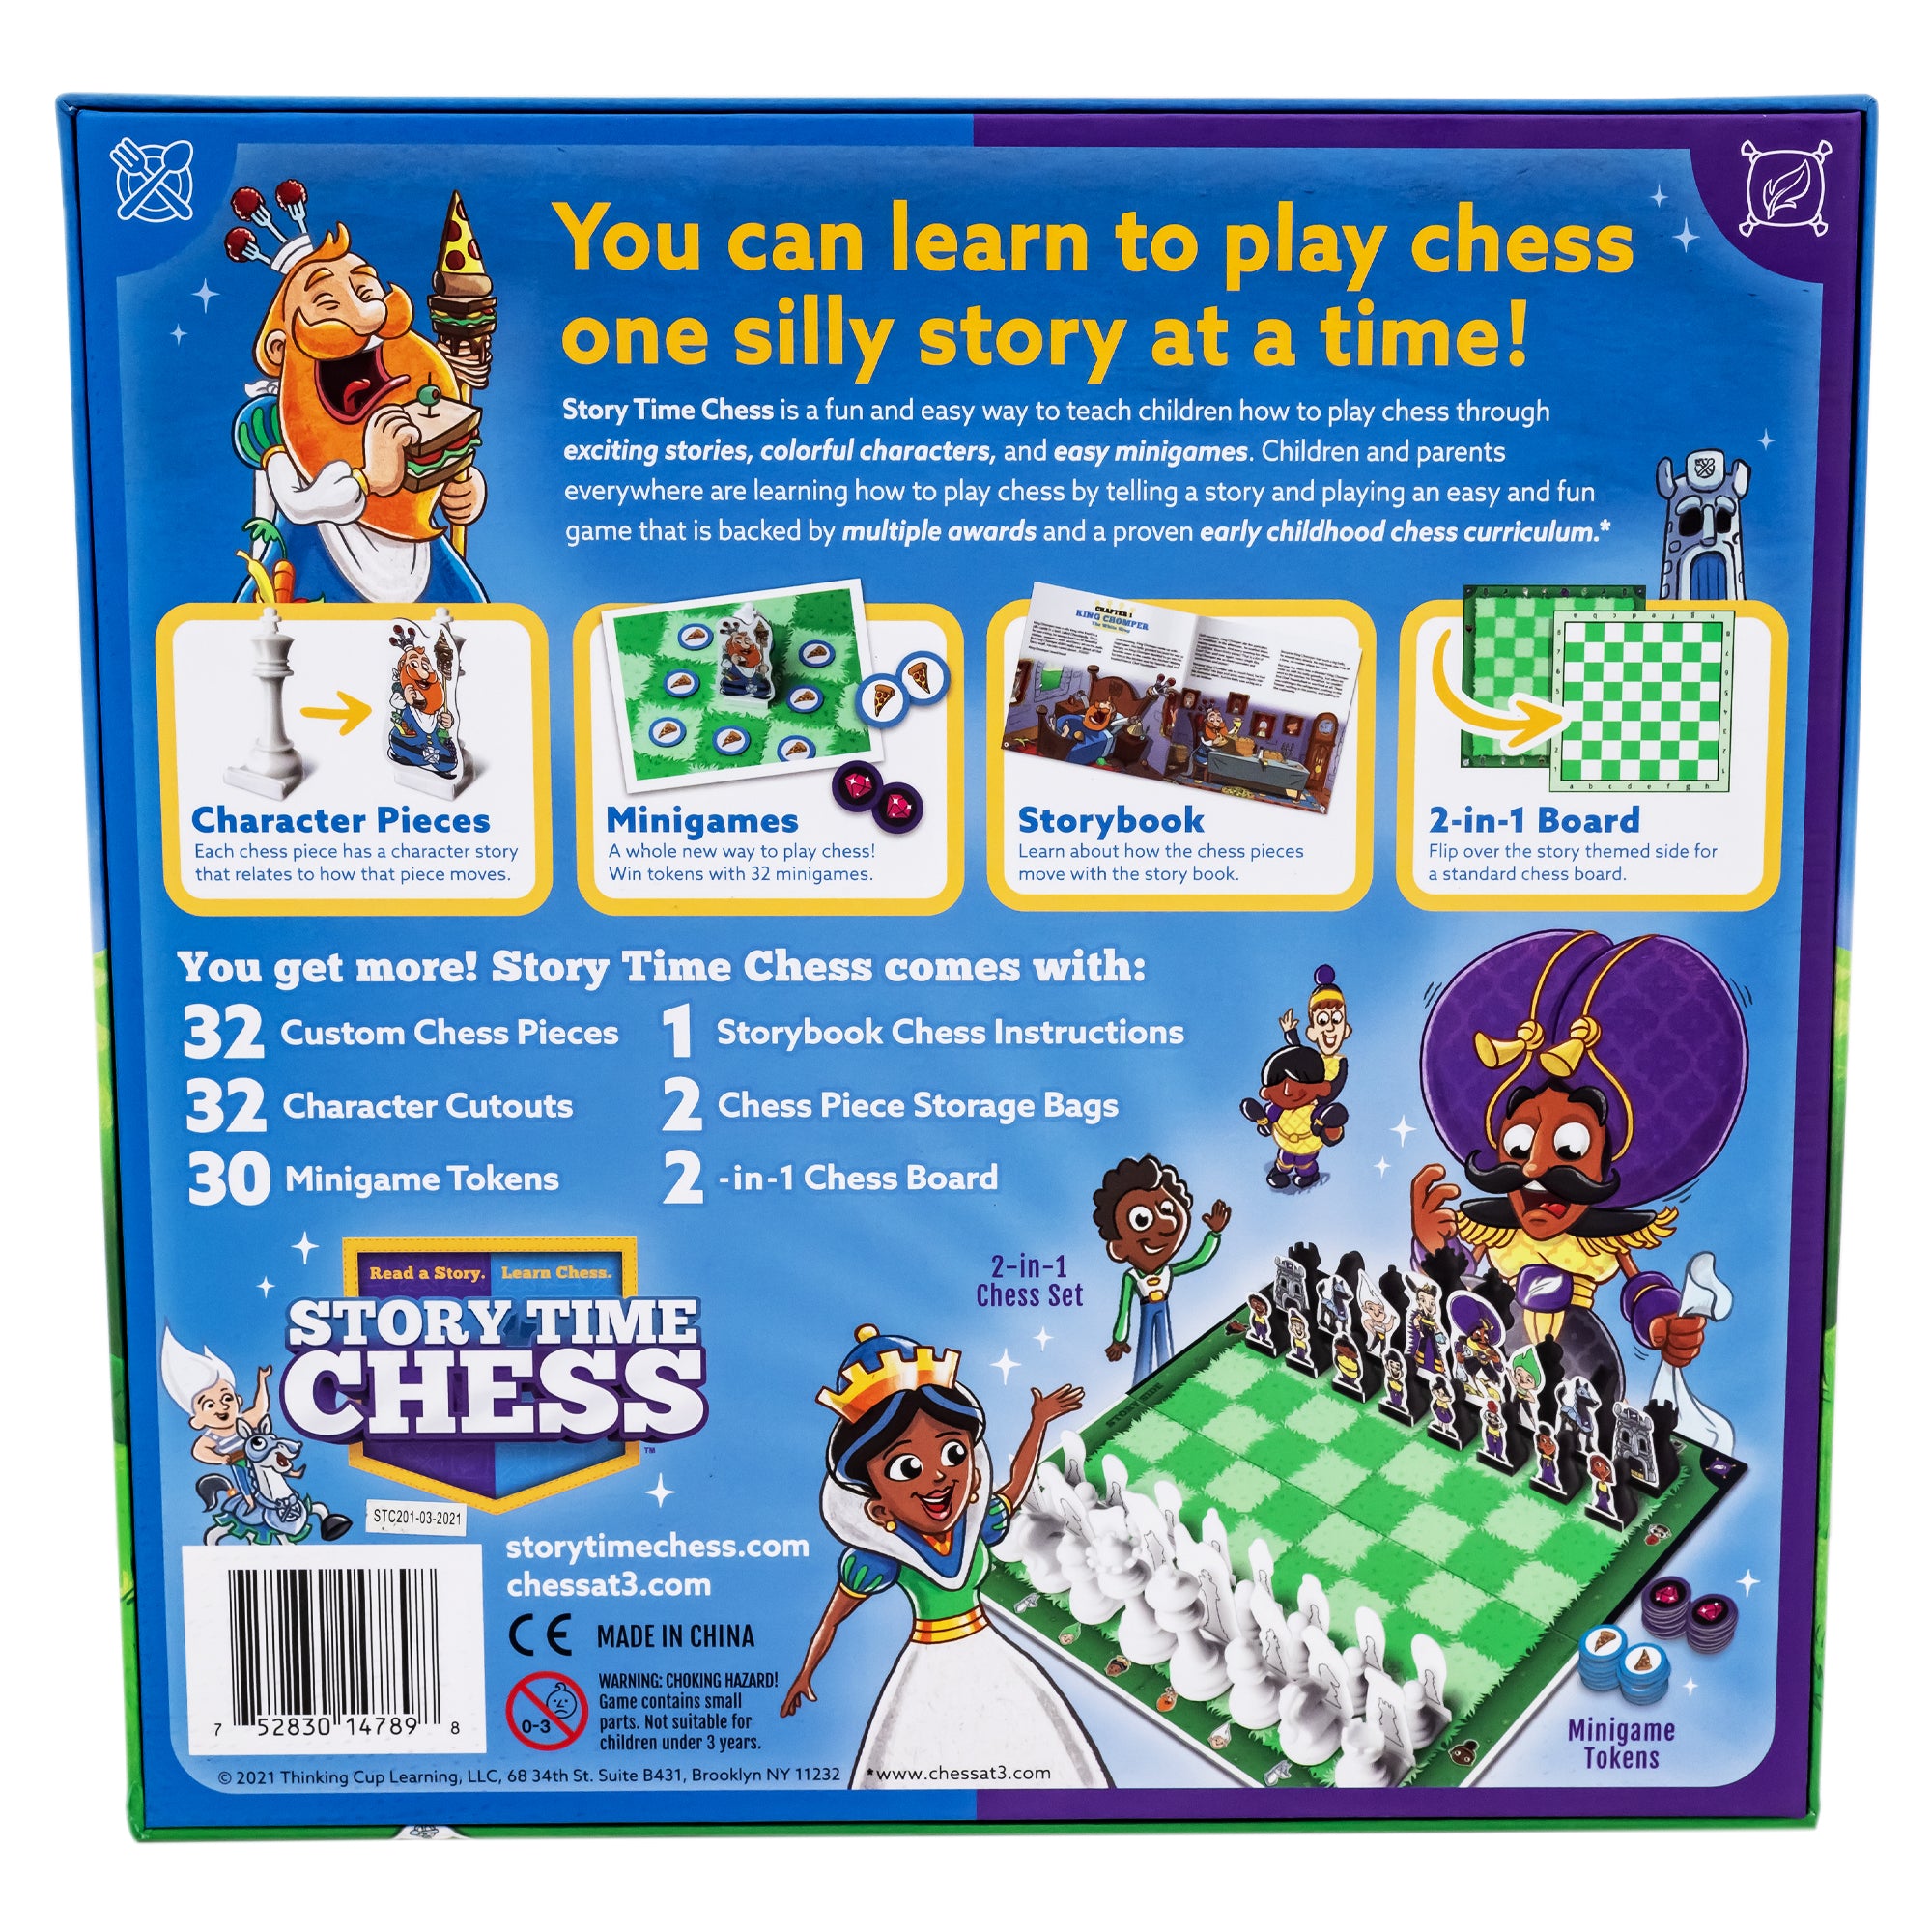 Story Time Chess Box back has a blue background. There is white text with a yellow header reading “You can learn to play chess one silly story at a time.” In the bottom-right corner, you can see a gameboard with the pieces in the starting position. There are several characters all over the box. Toward the top and across, are 4 pictures of pieces the set includes.